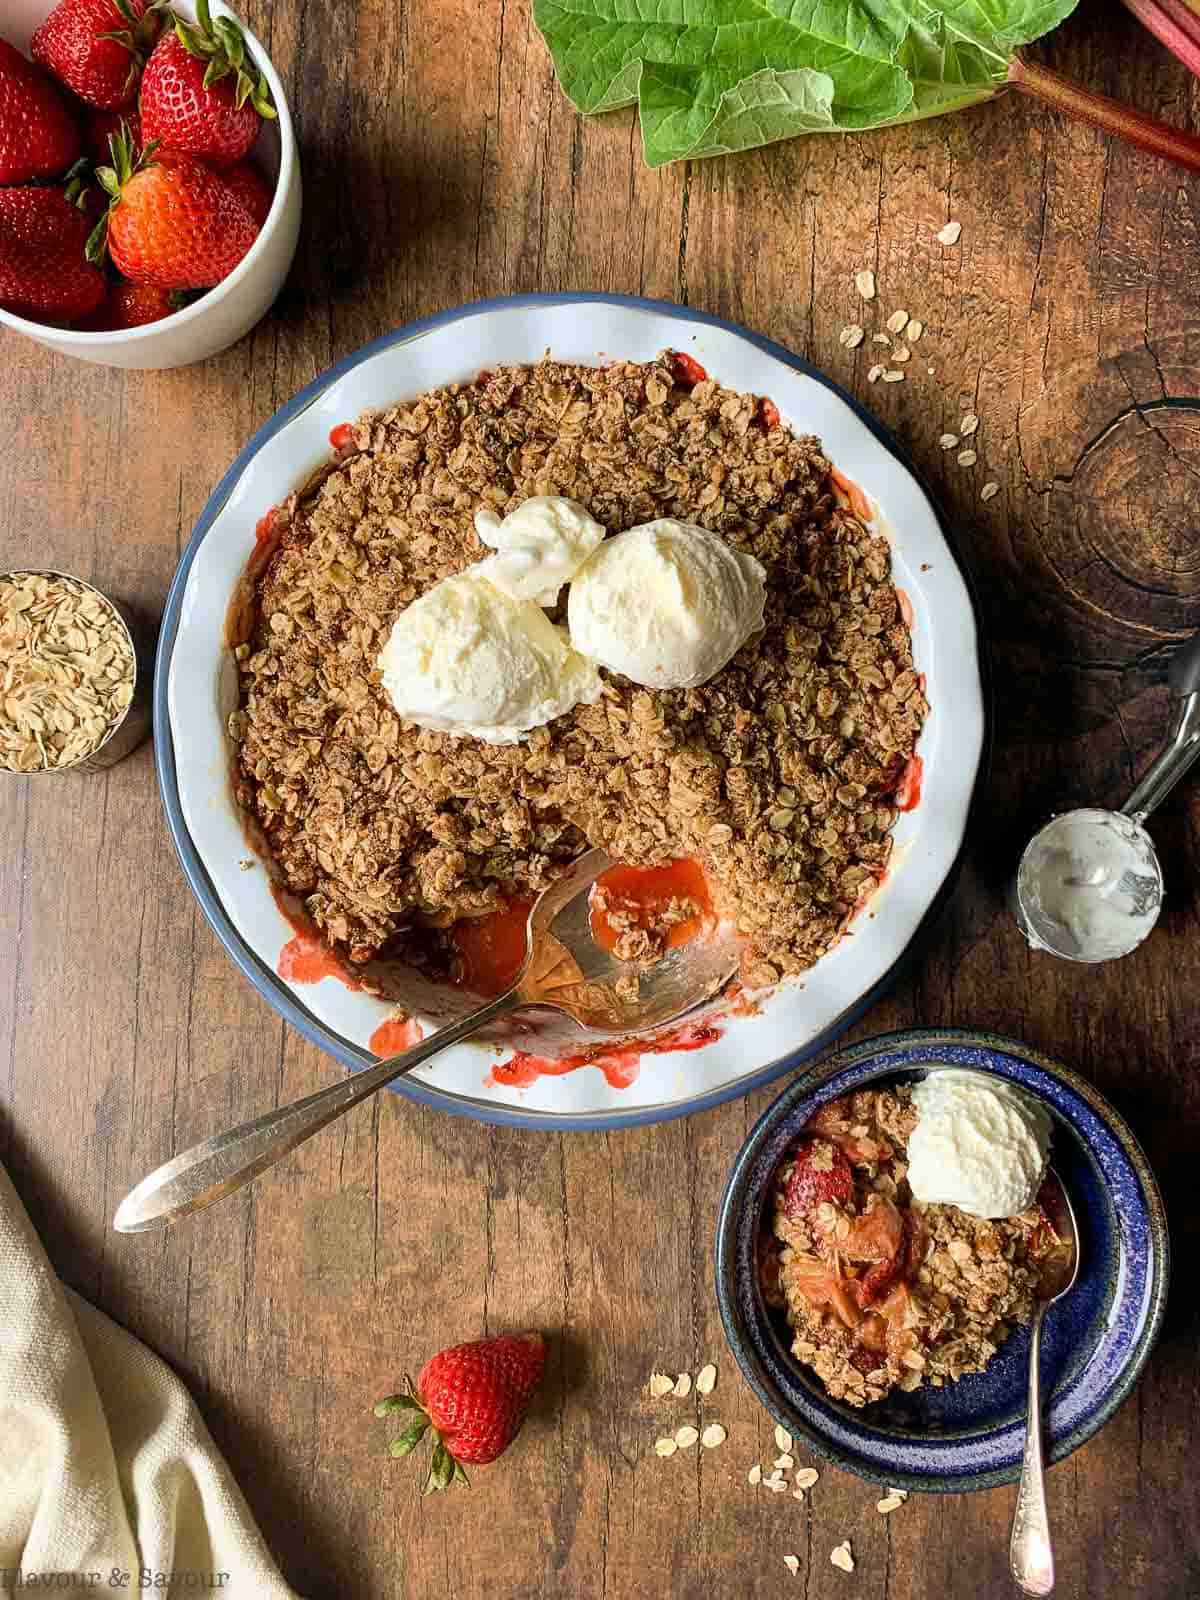 Overhead view of Strawberry Rhubarb Crisp with ice cream and fresh berries